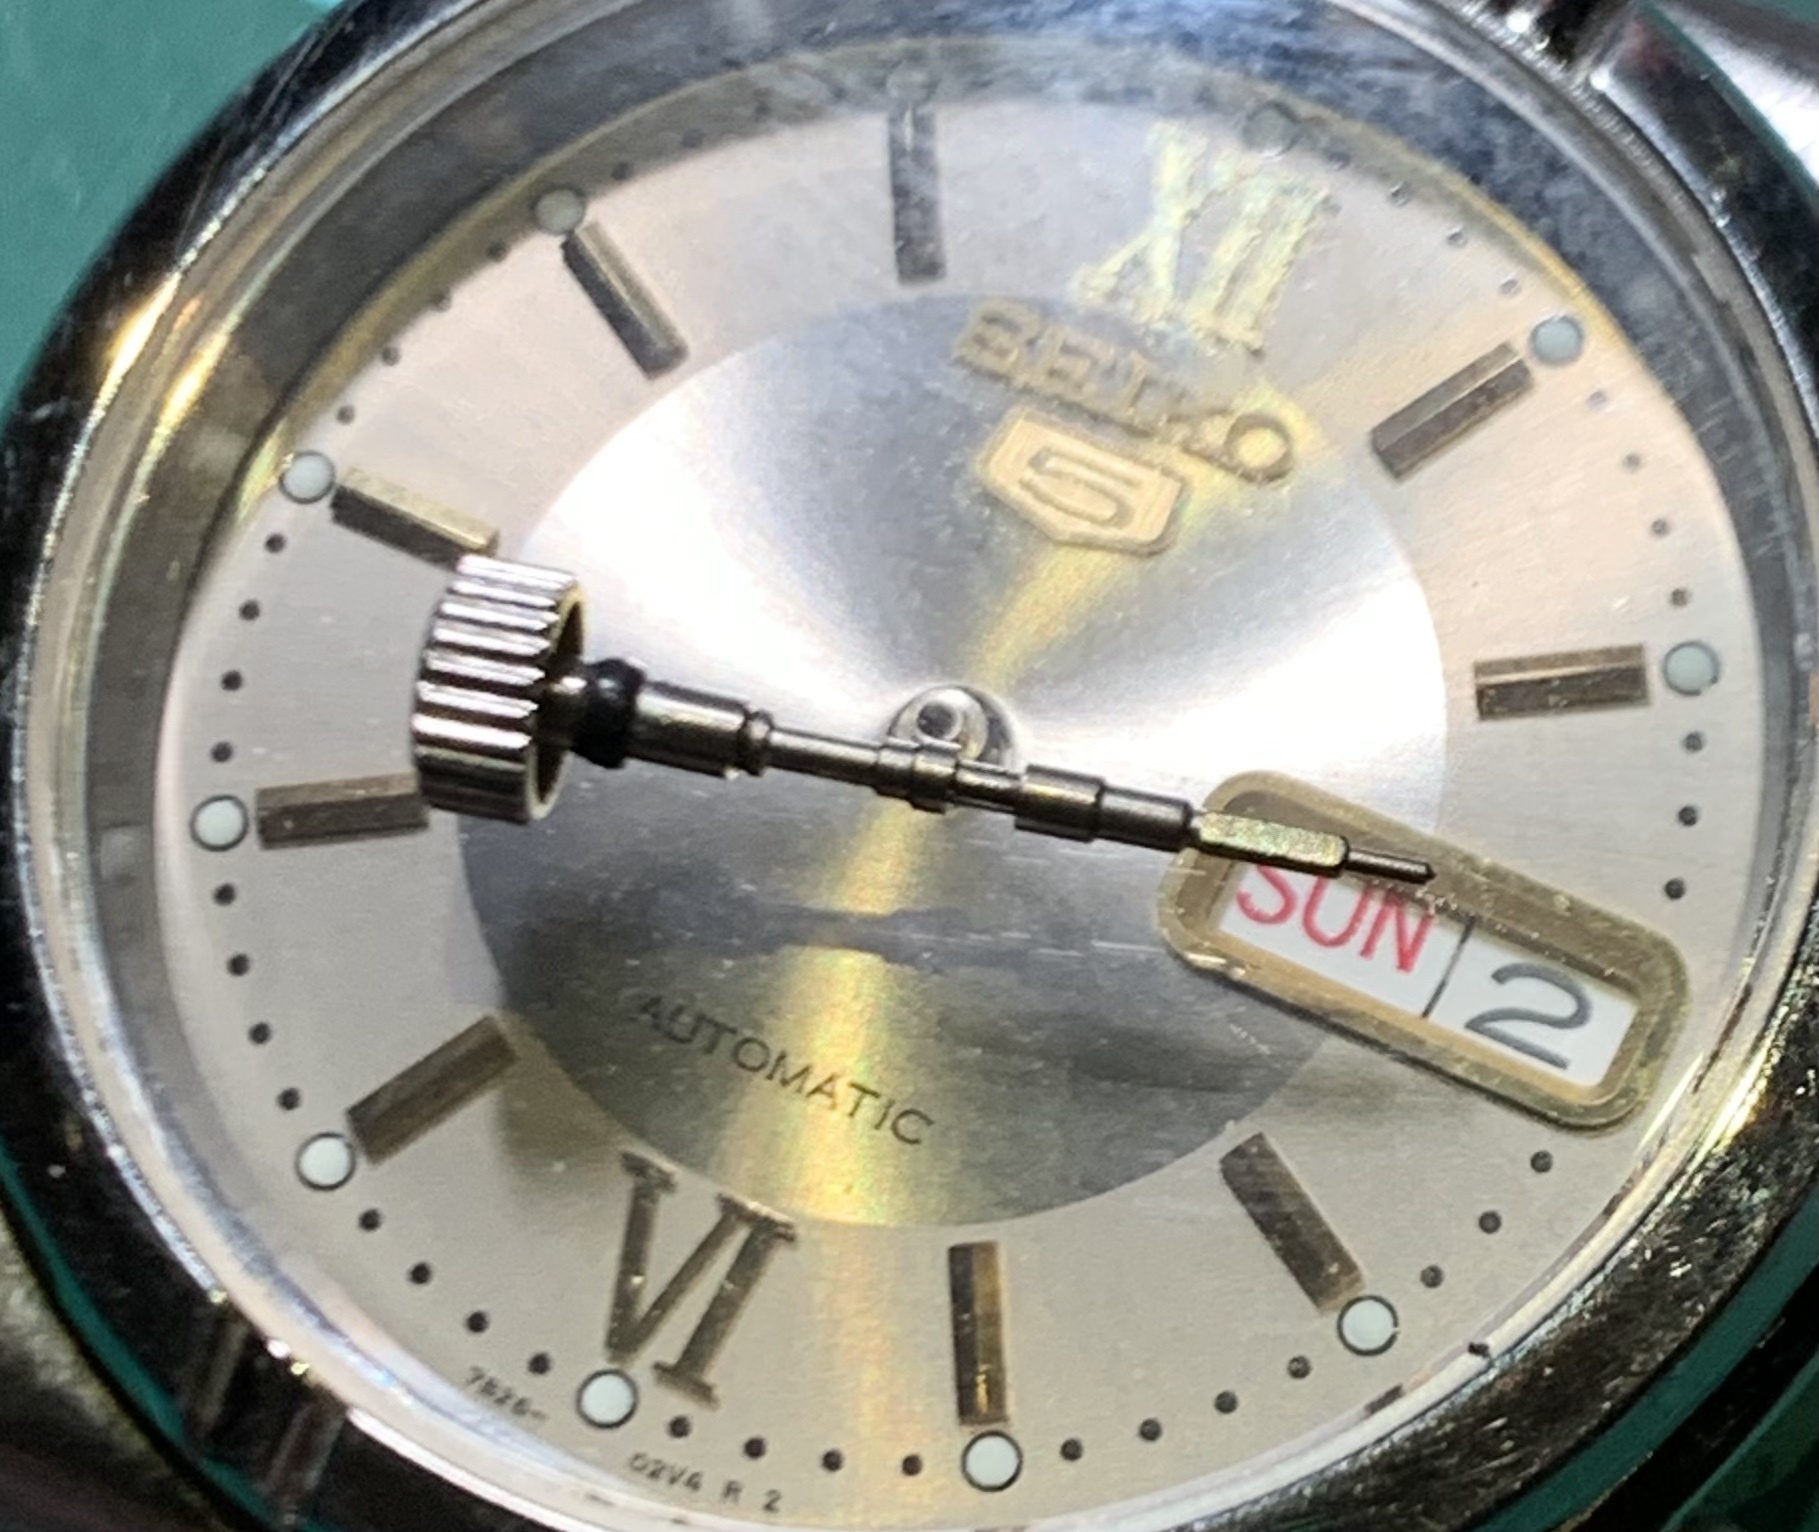 Seiko 7S26 Crown Removal (from stem) - Watch Case Issues, Opening, Movement/Stem  Removal, Case Parts, straps and bracelets - Watch Repair Talk